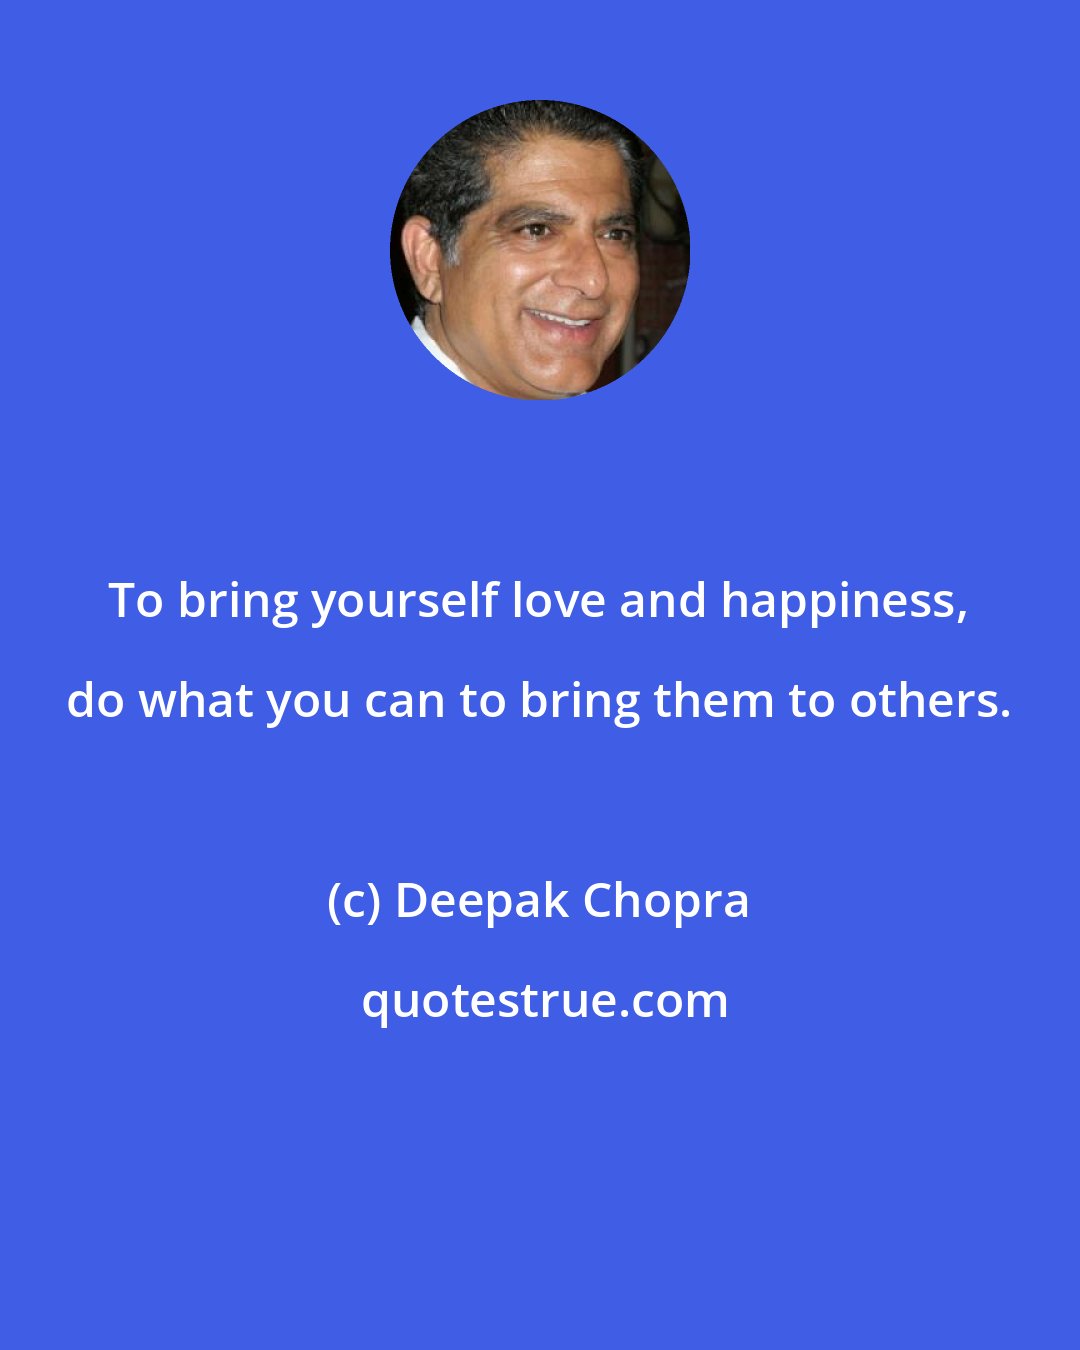 Deepak Chopra: To bring yourself love and happiness, do what you can to bring them to others.